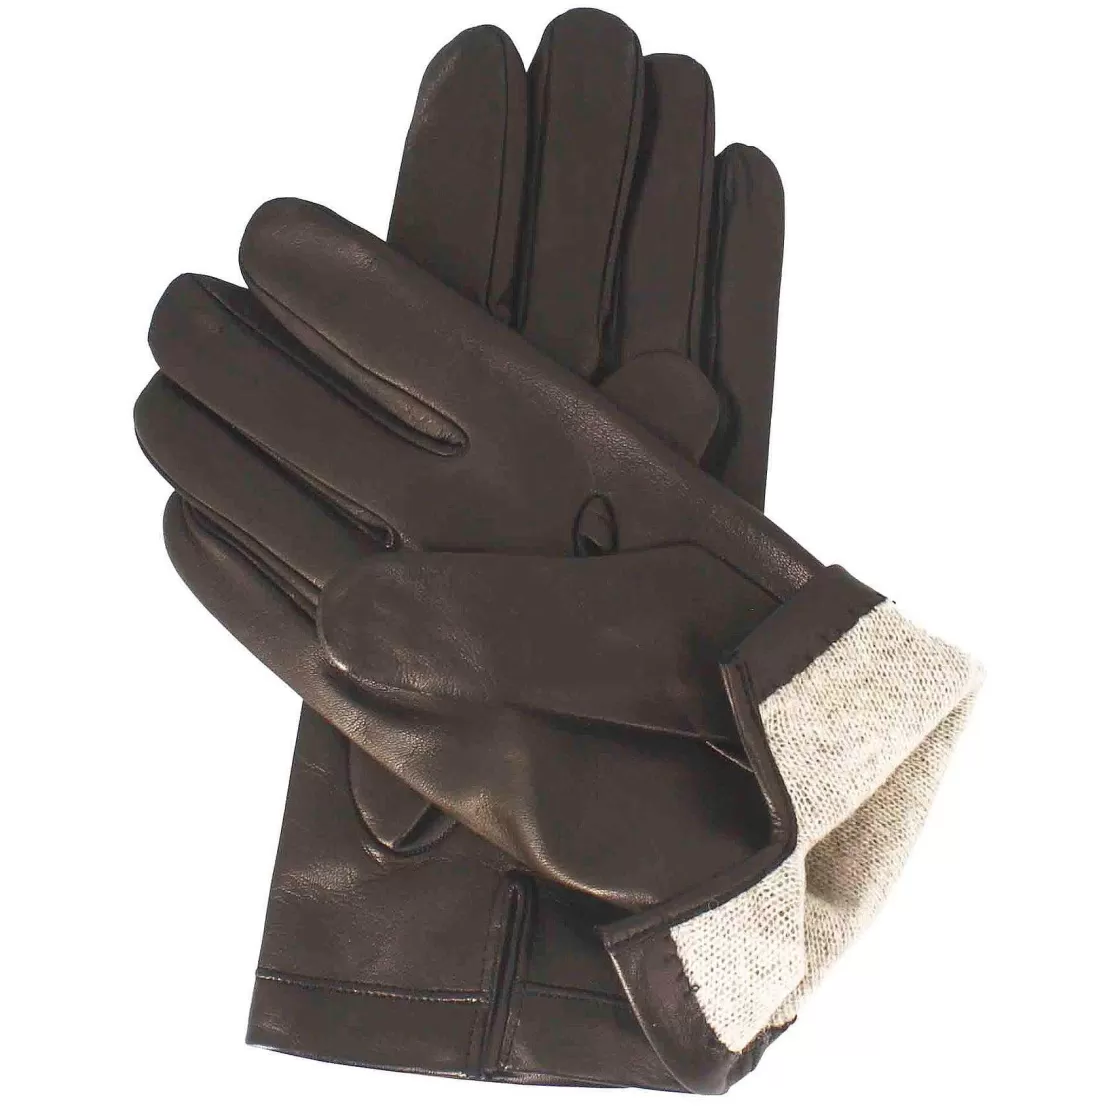 Leonardo Handmade Men'S Gloves In Brown Nappa Leather Lined In Cashmere New